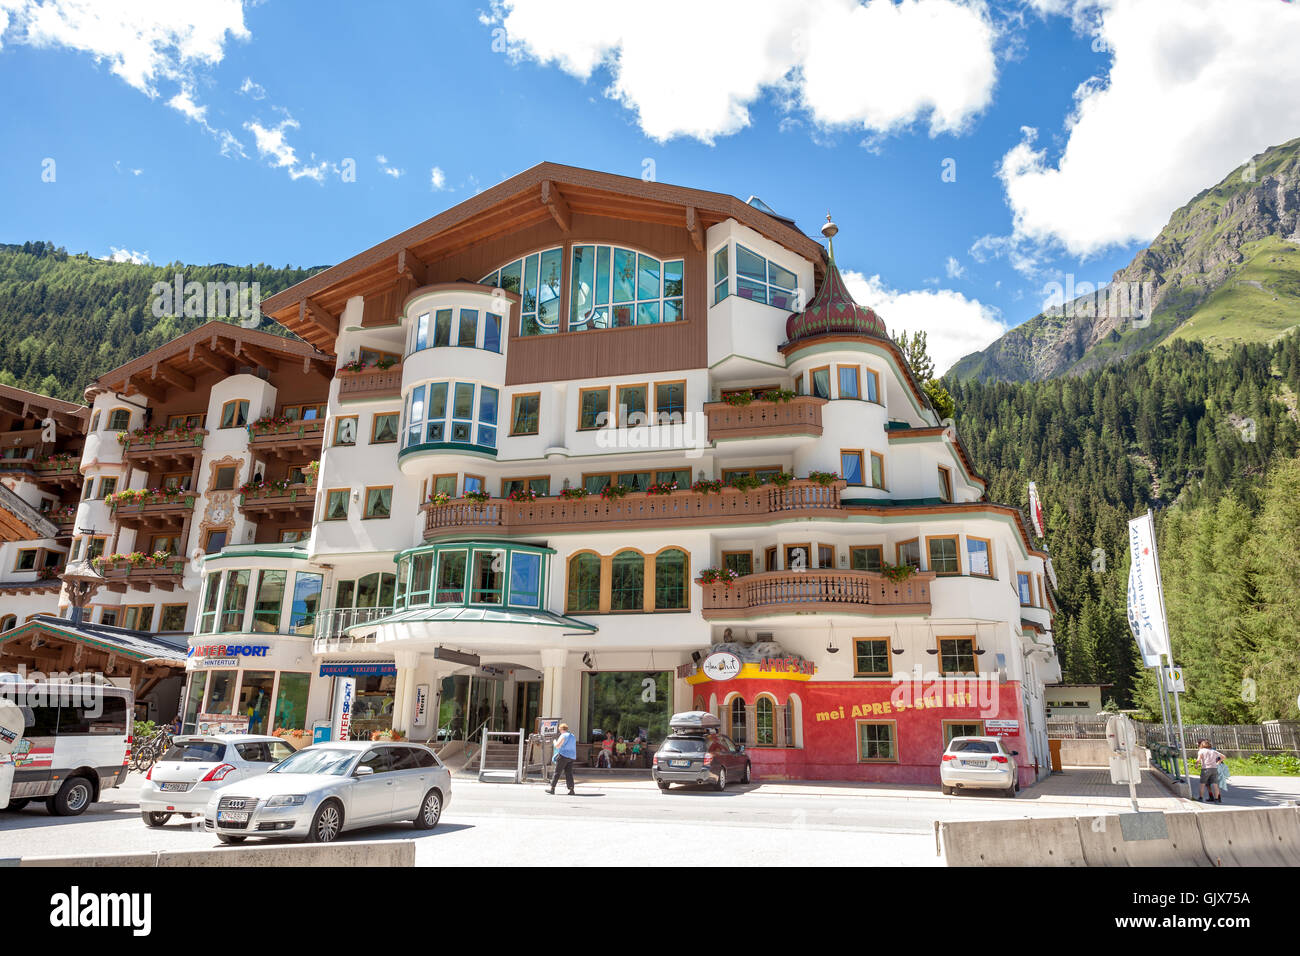 Hotel Gletscher and Intersports shop - Holidays in Tyrol Stock Photo